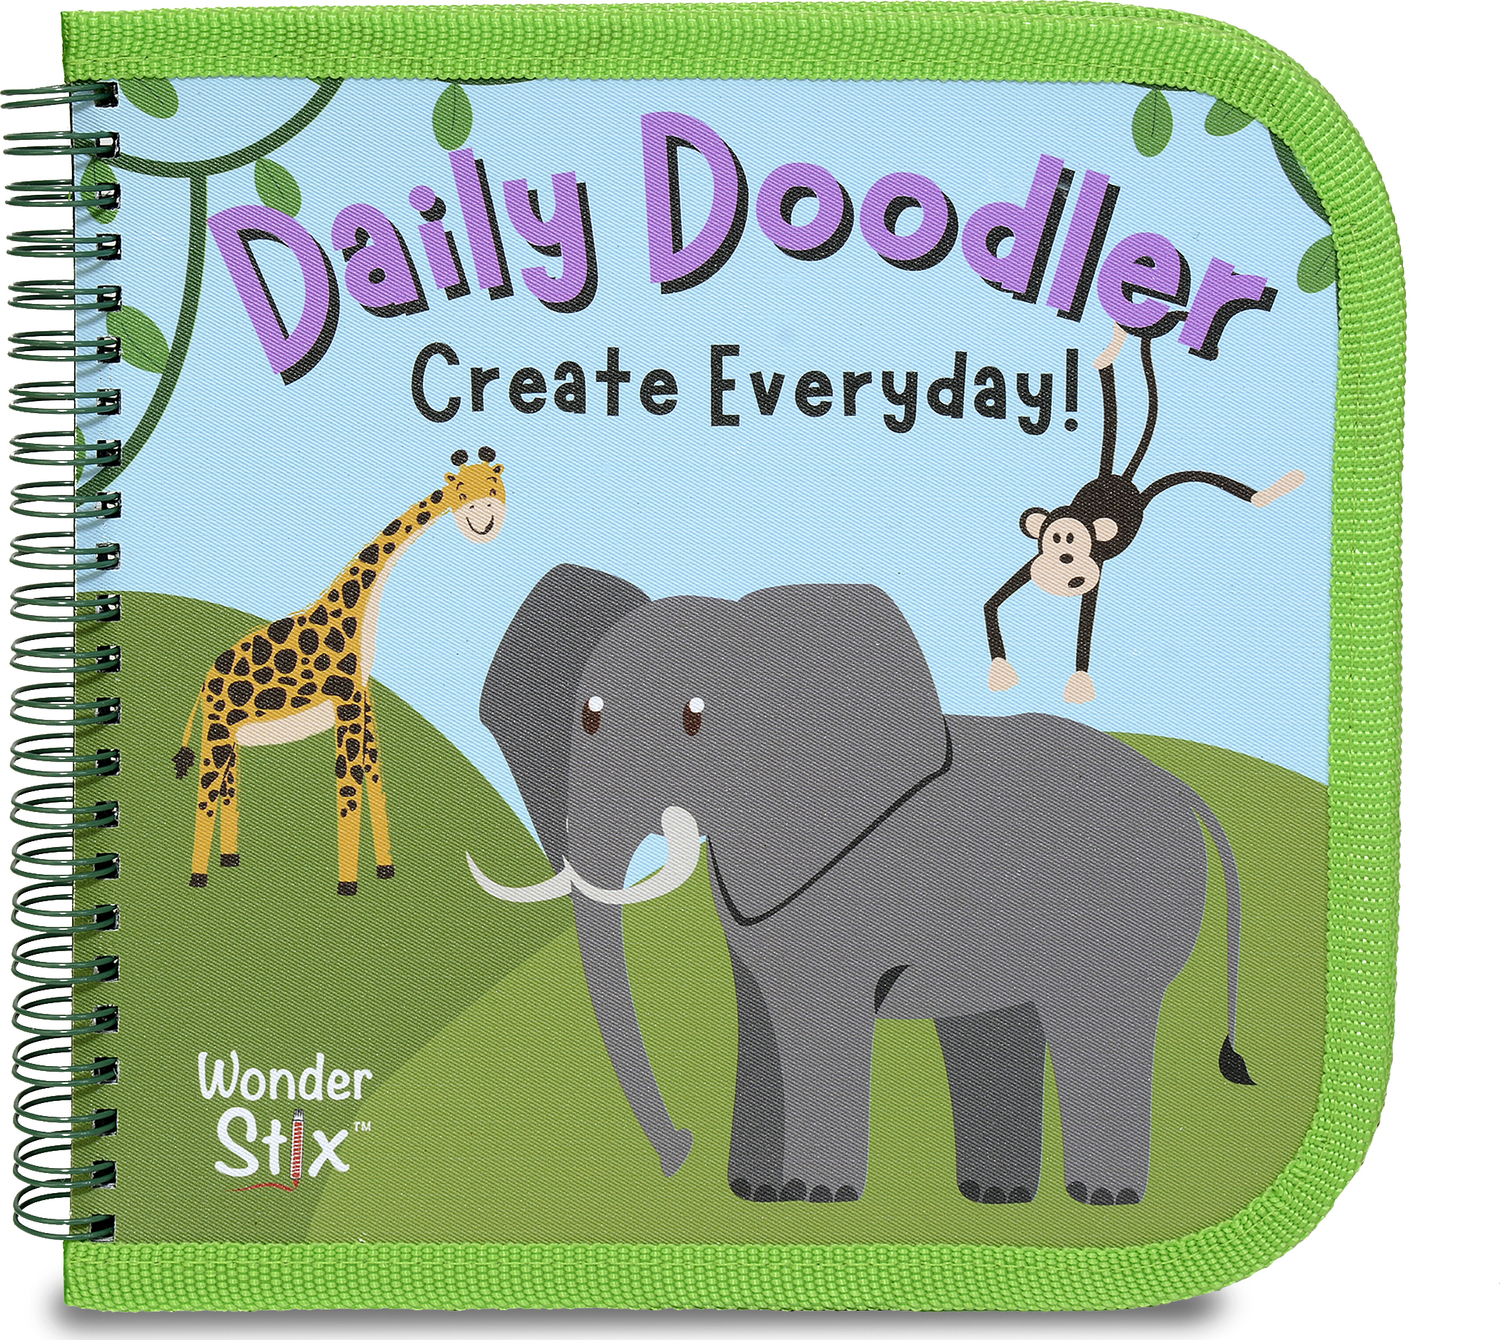 Daily Doodler Jungle Animals Cover